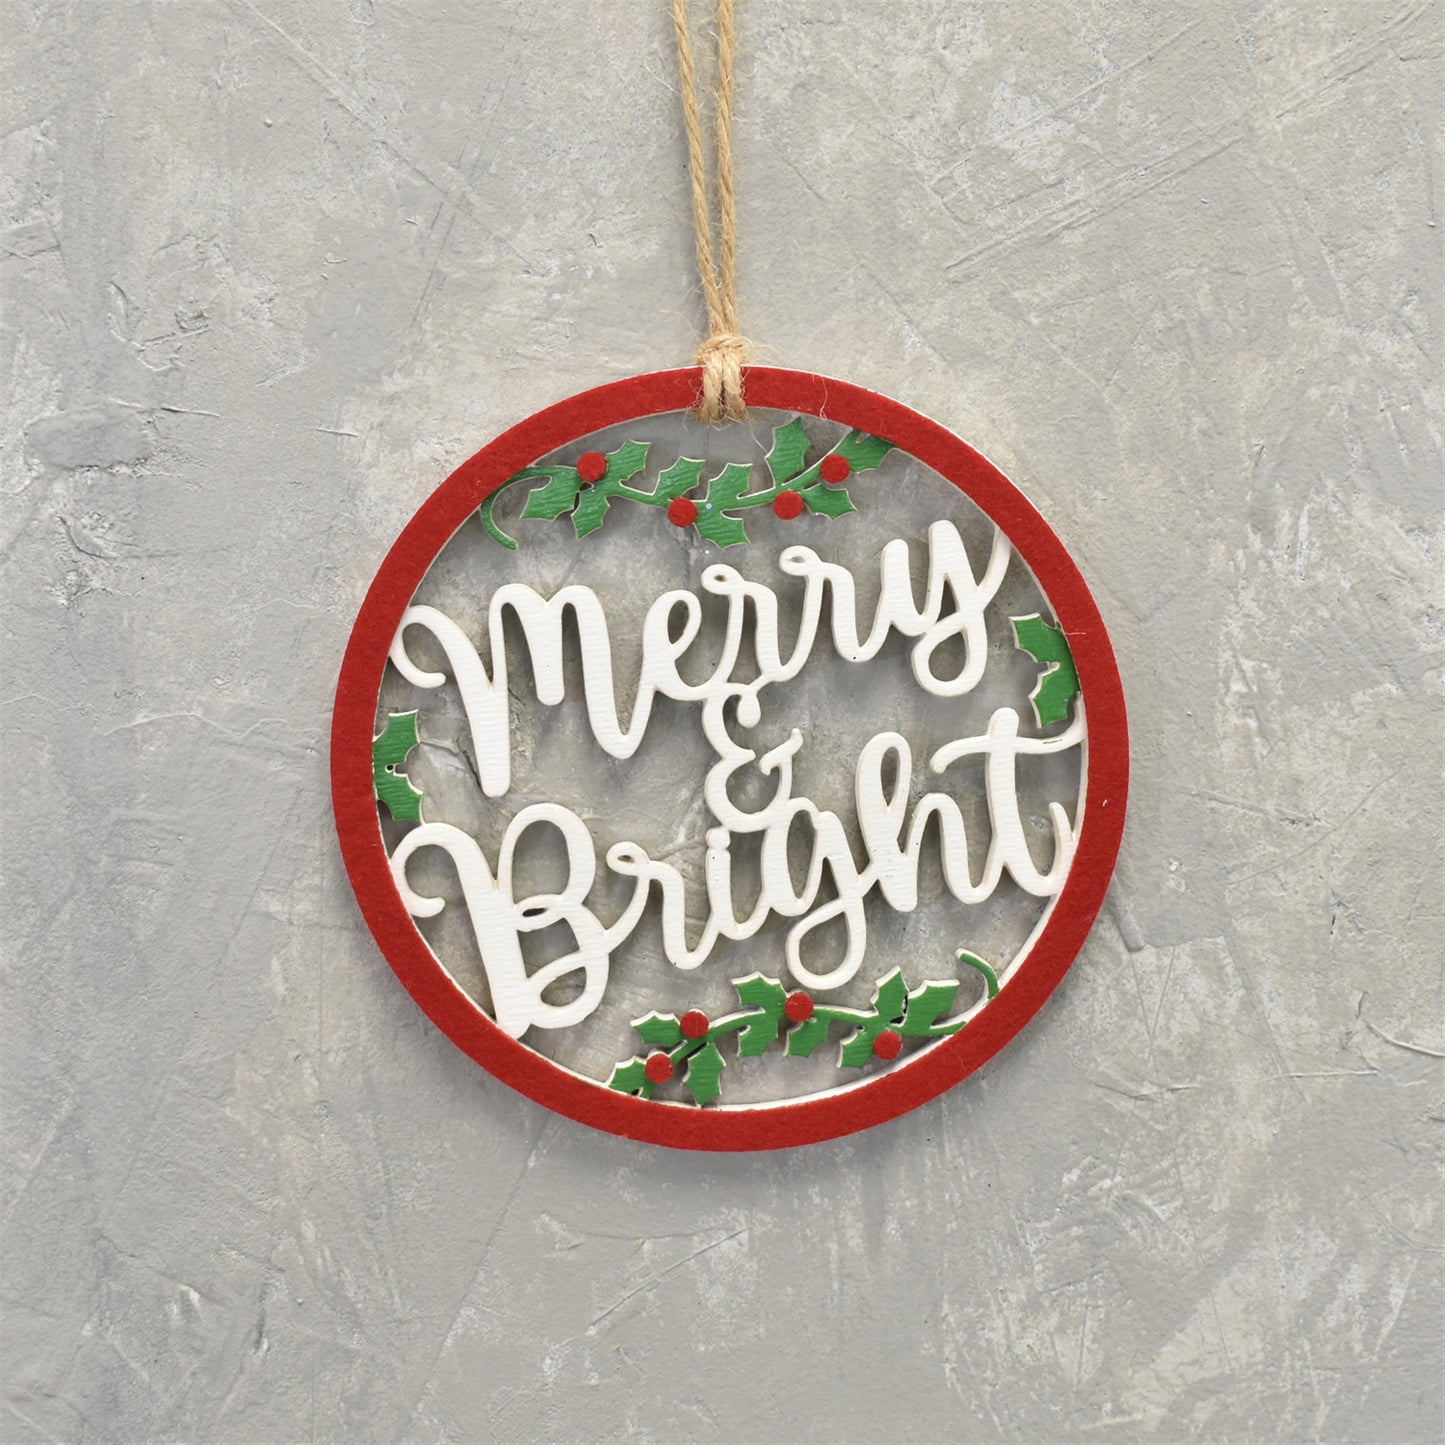 Wooden Merry/Bright Cut Out Ornament 7.75" in White/Red/Green | QG